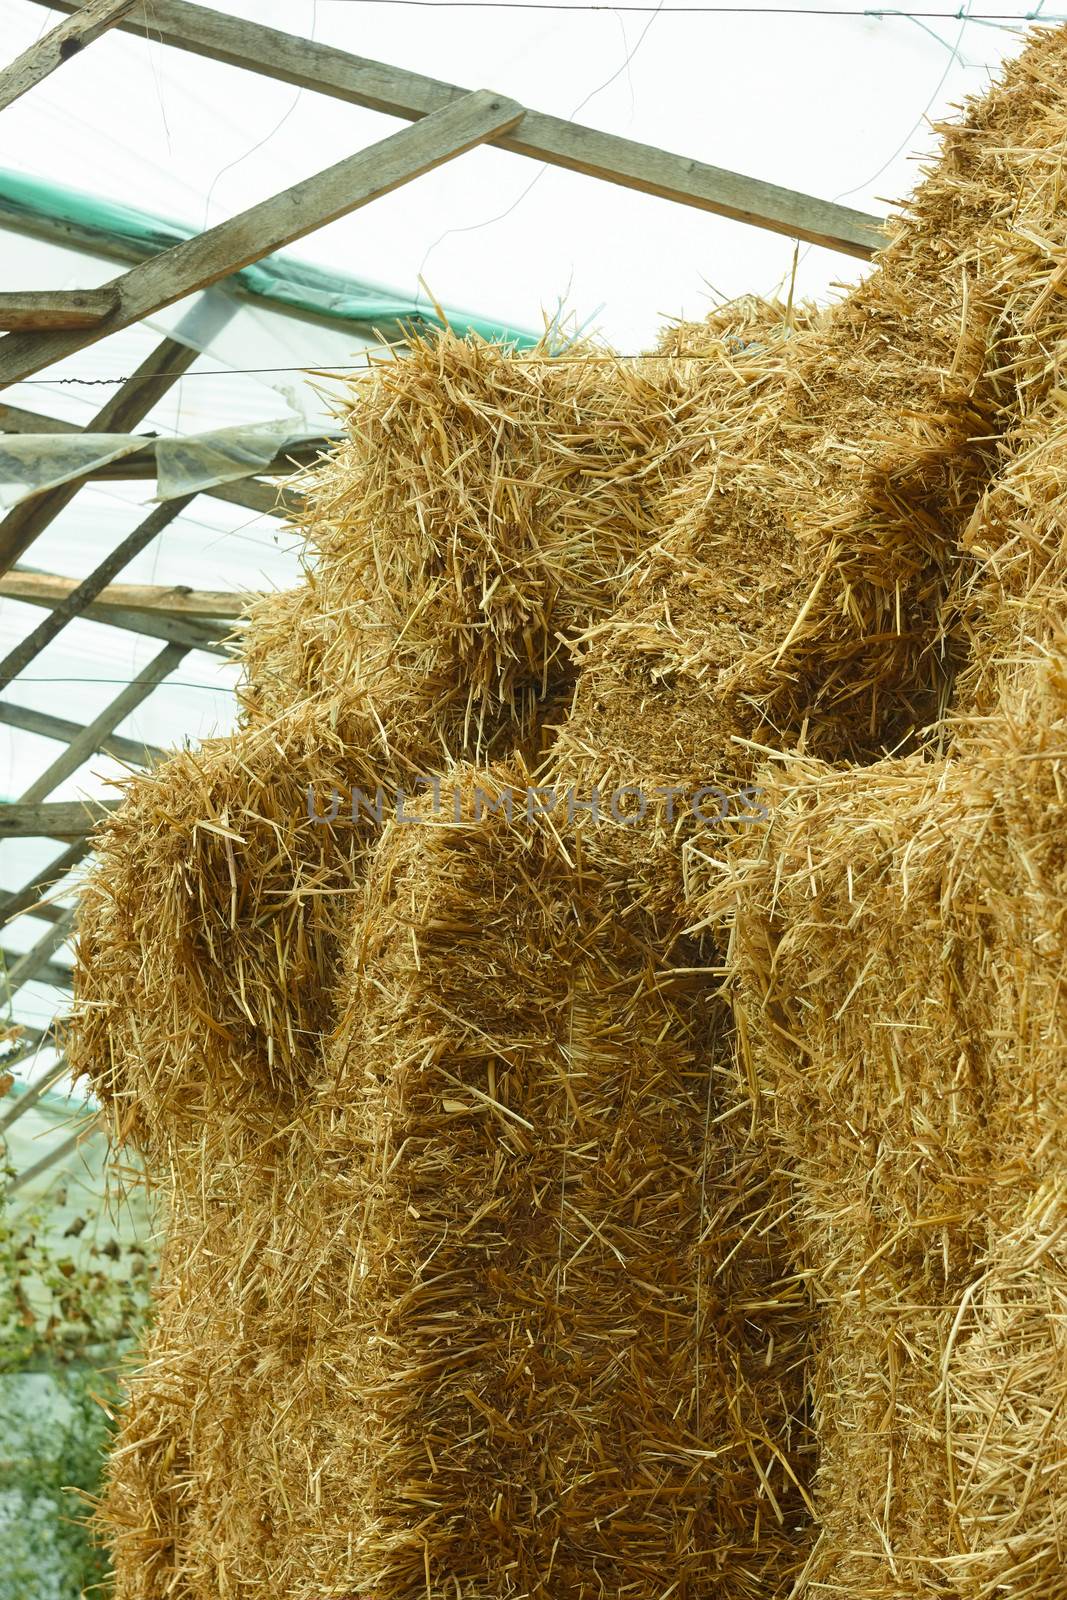 Bales of straw stacked in a heap by qiiip